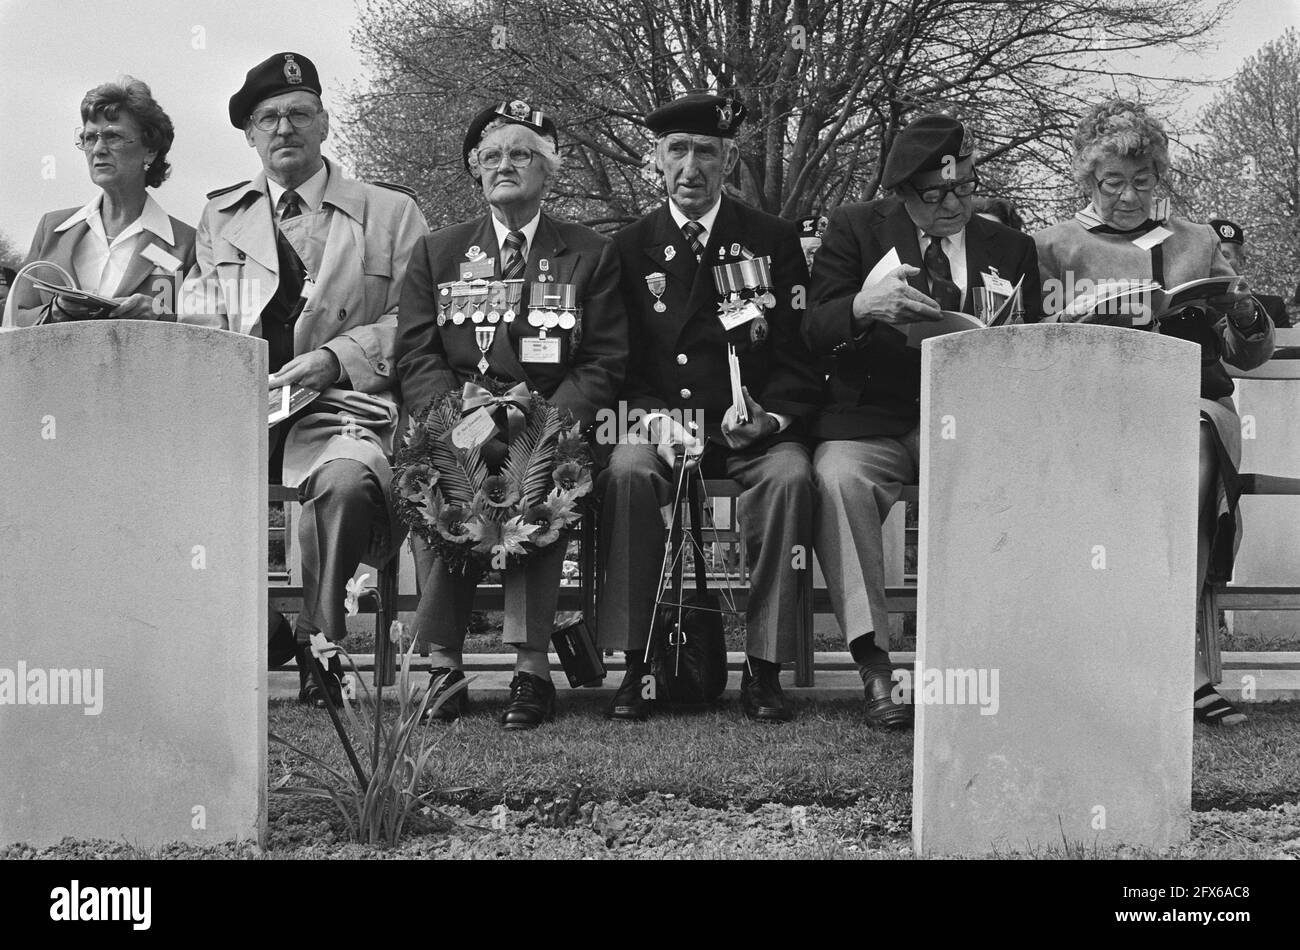 Memorial service at Canadian War Cemetery in Groesbeek in honor of Princess Margriet; during the service, Canadian veterans sat on chairs between the graves, May 7, 1985, war cemeteries, memorial services, veterans, The Netherlands, 20th century press agency photo, news to remember, documentary, historic photography 1945-1990, visual stories, human history of the Twentieth Century, capturing moments in time Stock Photo